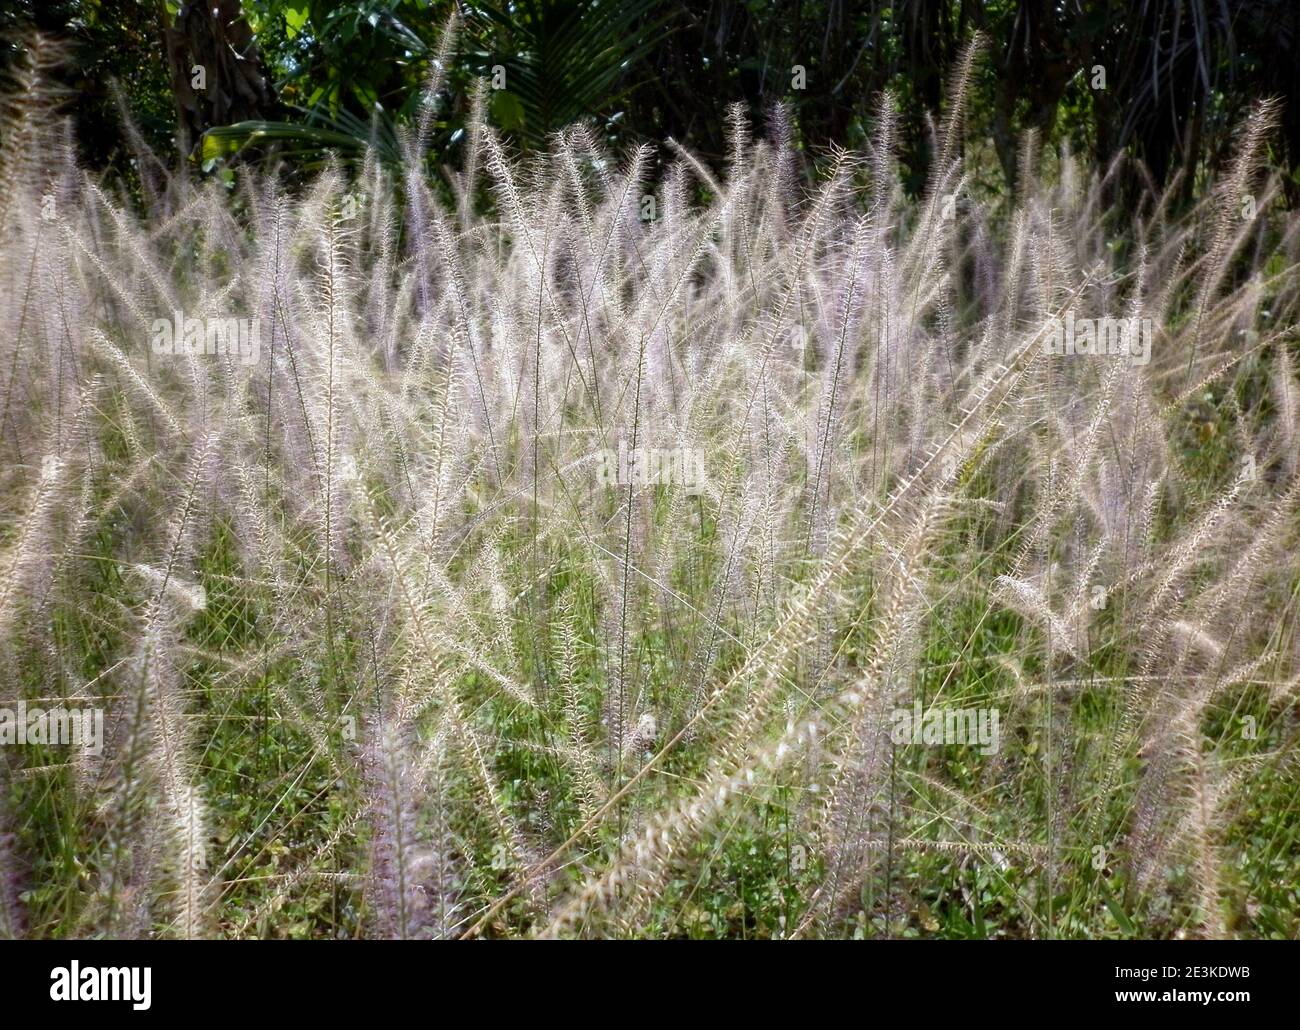 Lot of tiny grass flower spikes on plain lawn Stock Photo